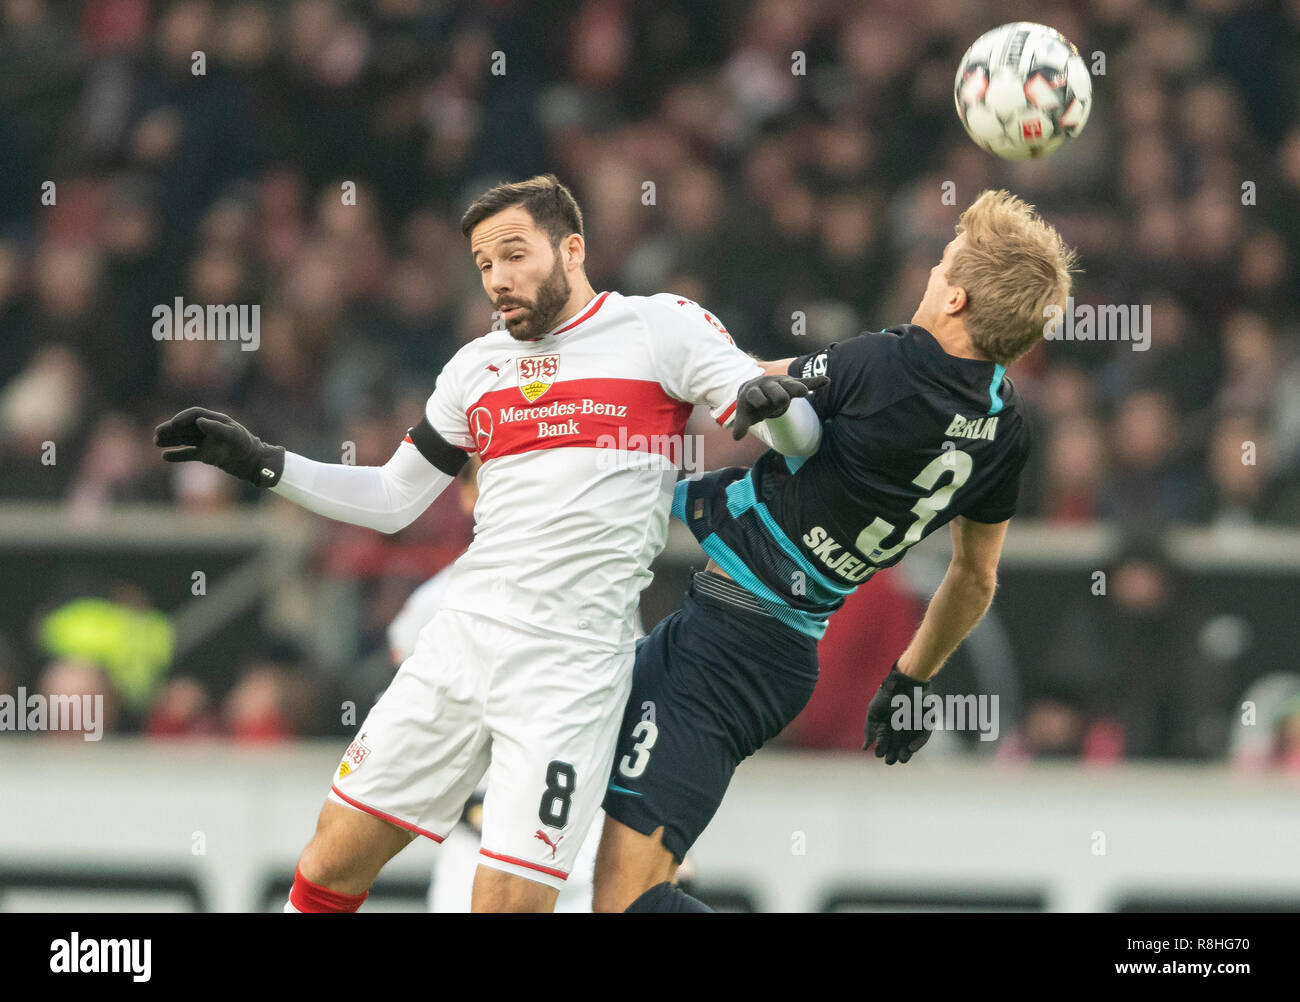 Stuttgart, Germany. 15th Dec, 2018. Soccer: Bundesliga, VfB Stuttgart - Hertha BSC, 15th matchday, Mercedes-Benz Arena : Stuttgart's Gonzalo Castro (l) and Herthas Per Ciljan Skjelbred fight for the ball. Credit: Daniel Maurer/dpa - IMPORTANT NOTE: In accordance with the requirements of the DFL Deutsche Fußball Liga or the DFB Deutscher Fußball-Bund, it is prohibited to use or have used photographs taken in the stadium and/or the match in the form of sequence images and/or video-like photo sequences./dpa/Alamy Live News Stock Photo